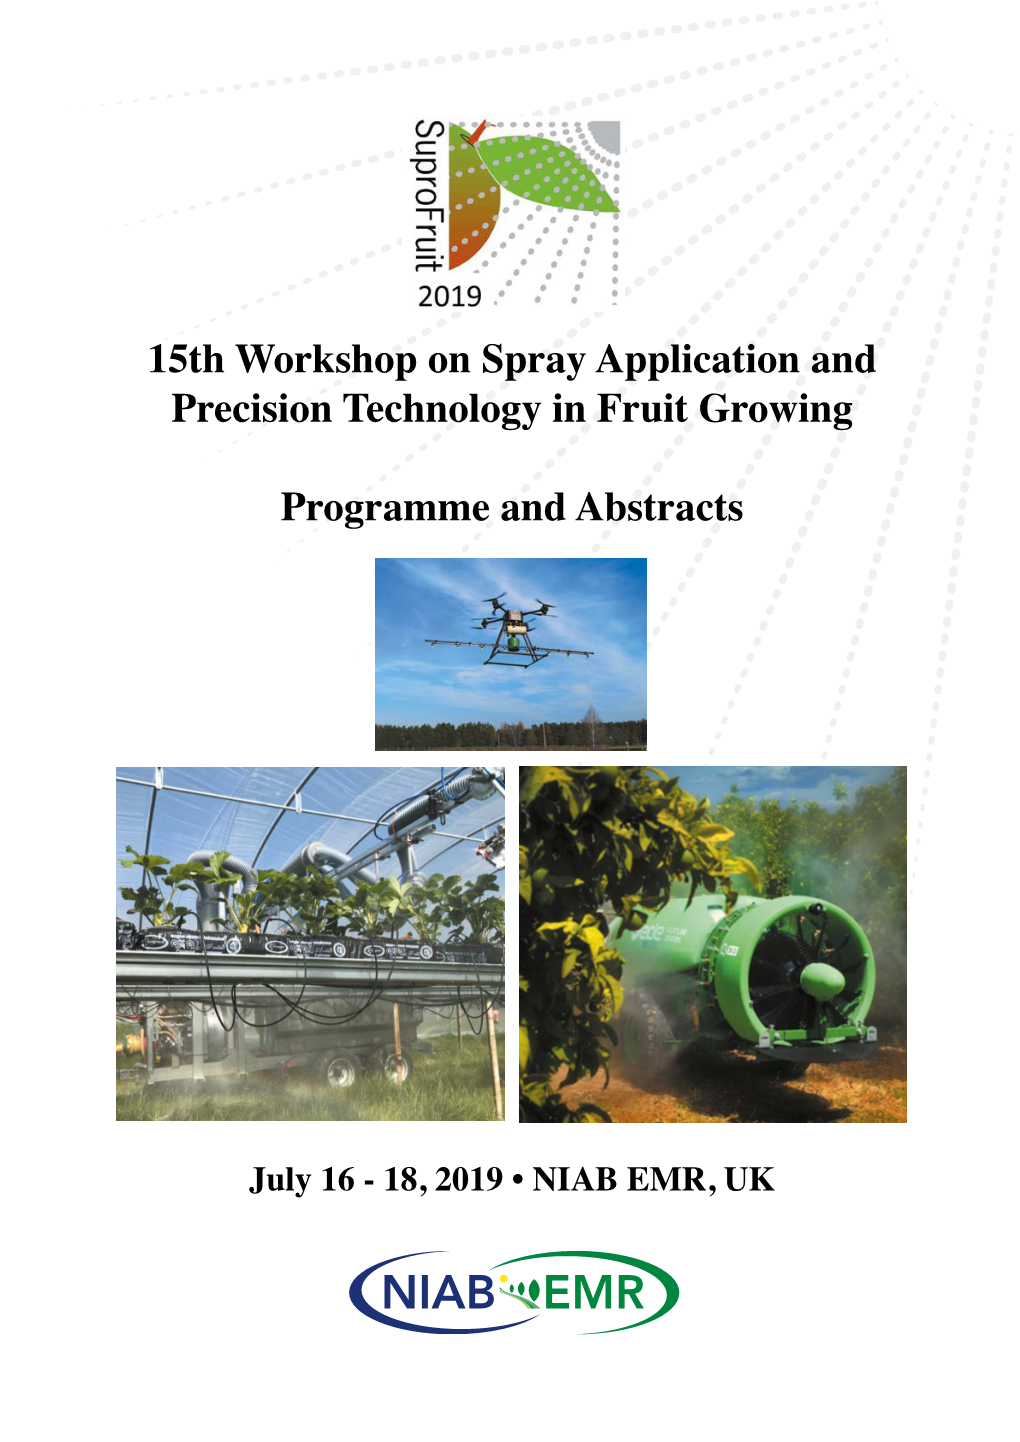 15Th Workshop on Spray Application and Precision Technology in Fruit Growing